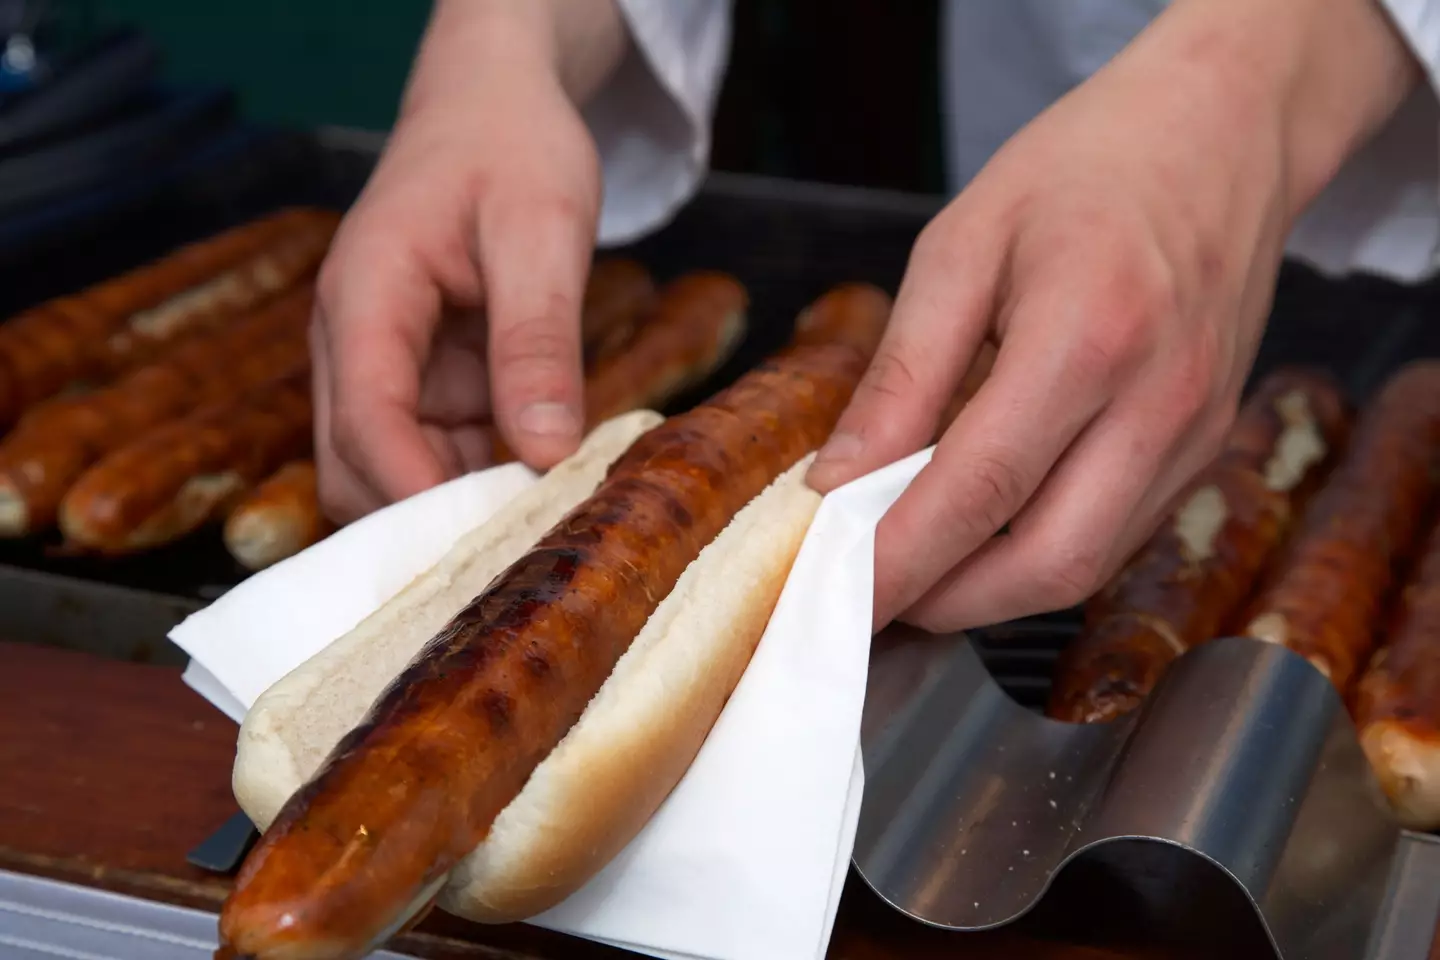 A bratwurst seller said they have more female customers than male.